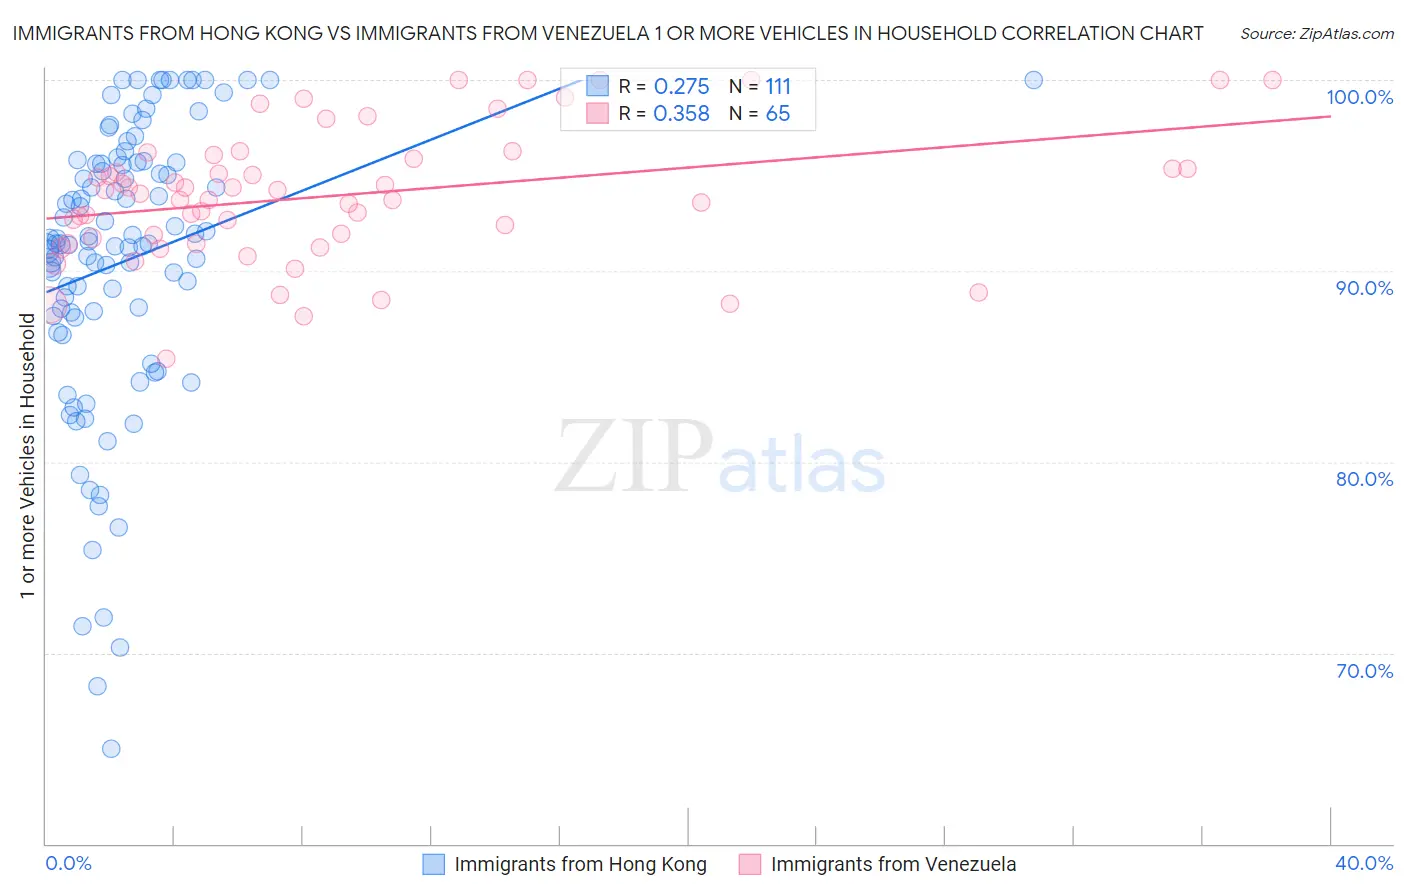 Immigrants from Hong Kong vs Immigrants from Venezuela 1 or more Vehicles in Household